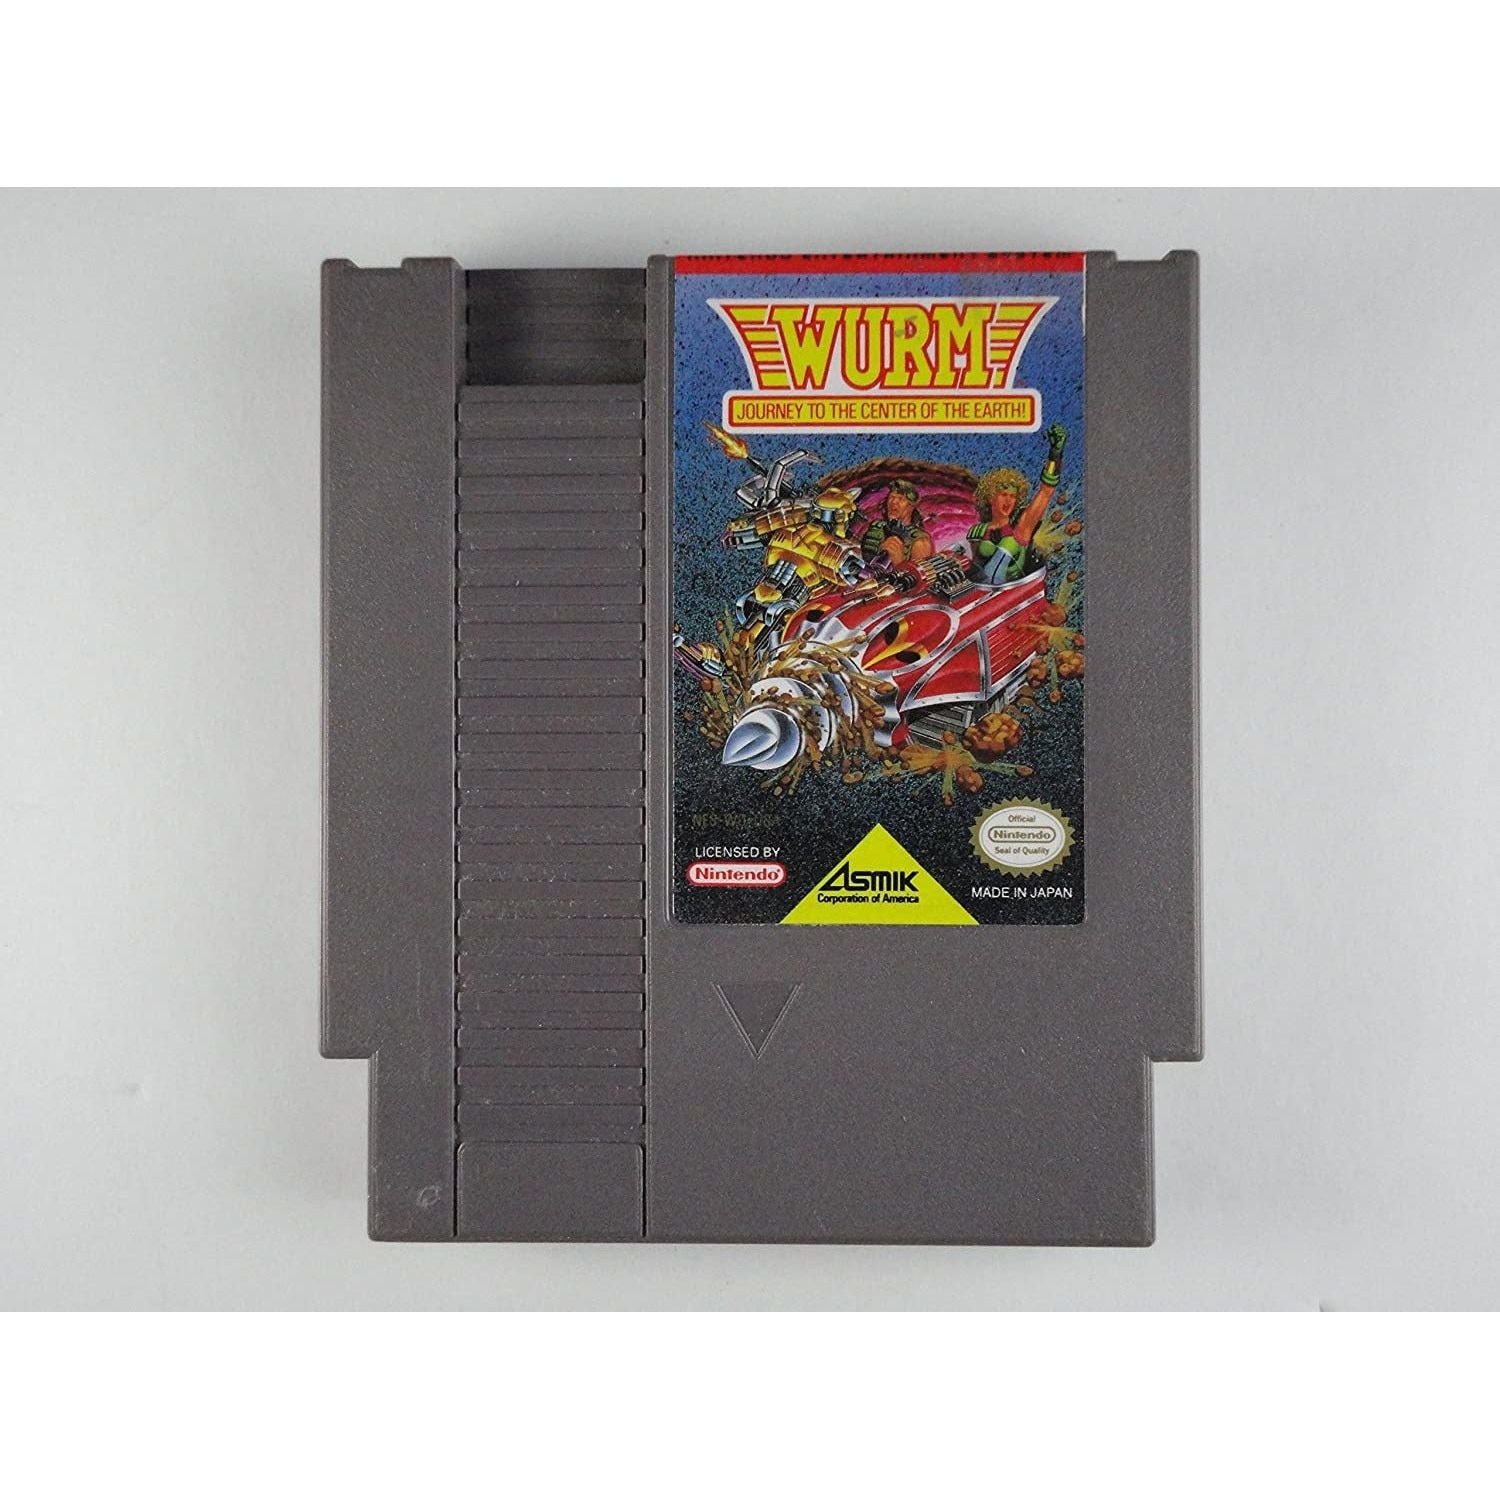 NES - WURM Journey to the Center of the Earth (Cartridge Only)